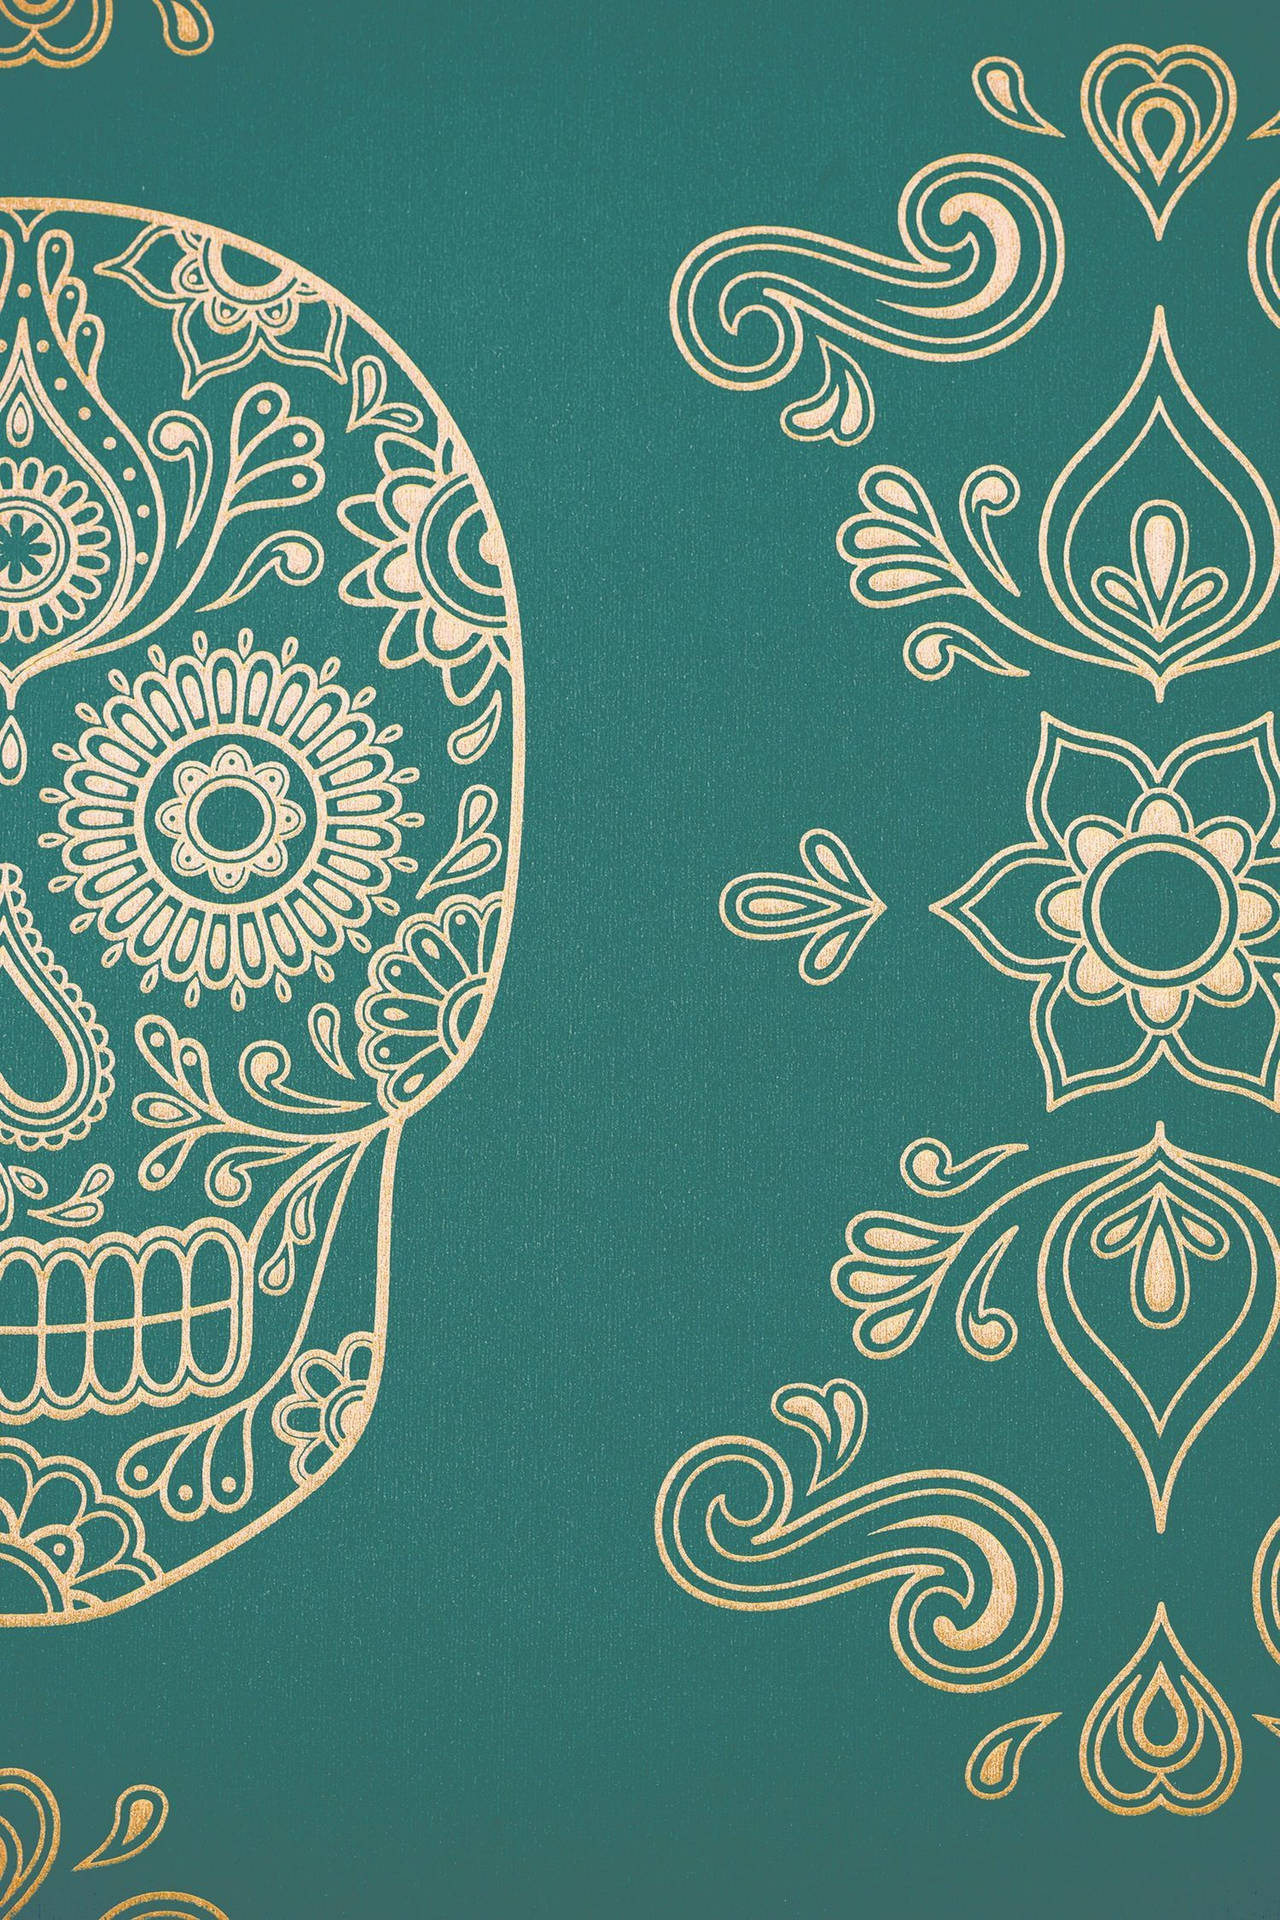 Emerald And Gold Sugar Skull Background